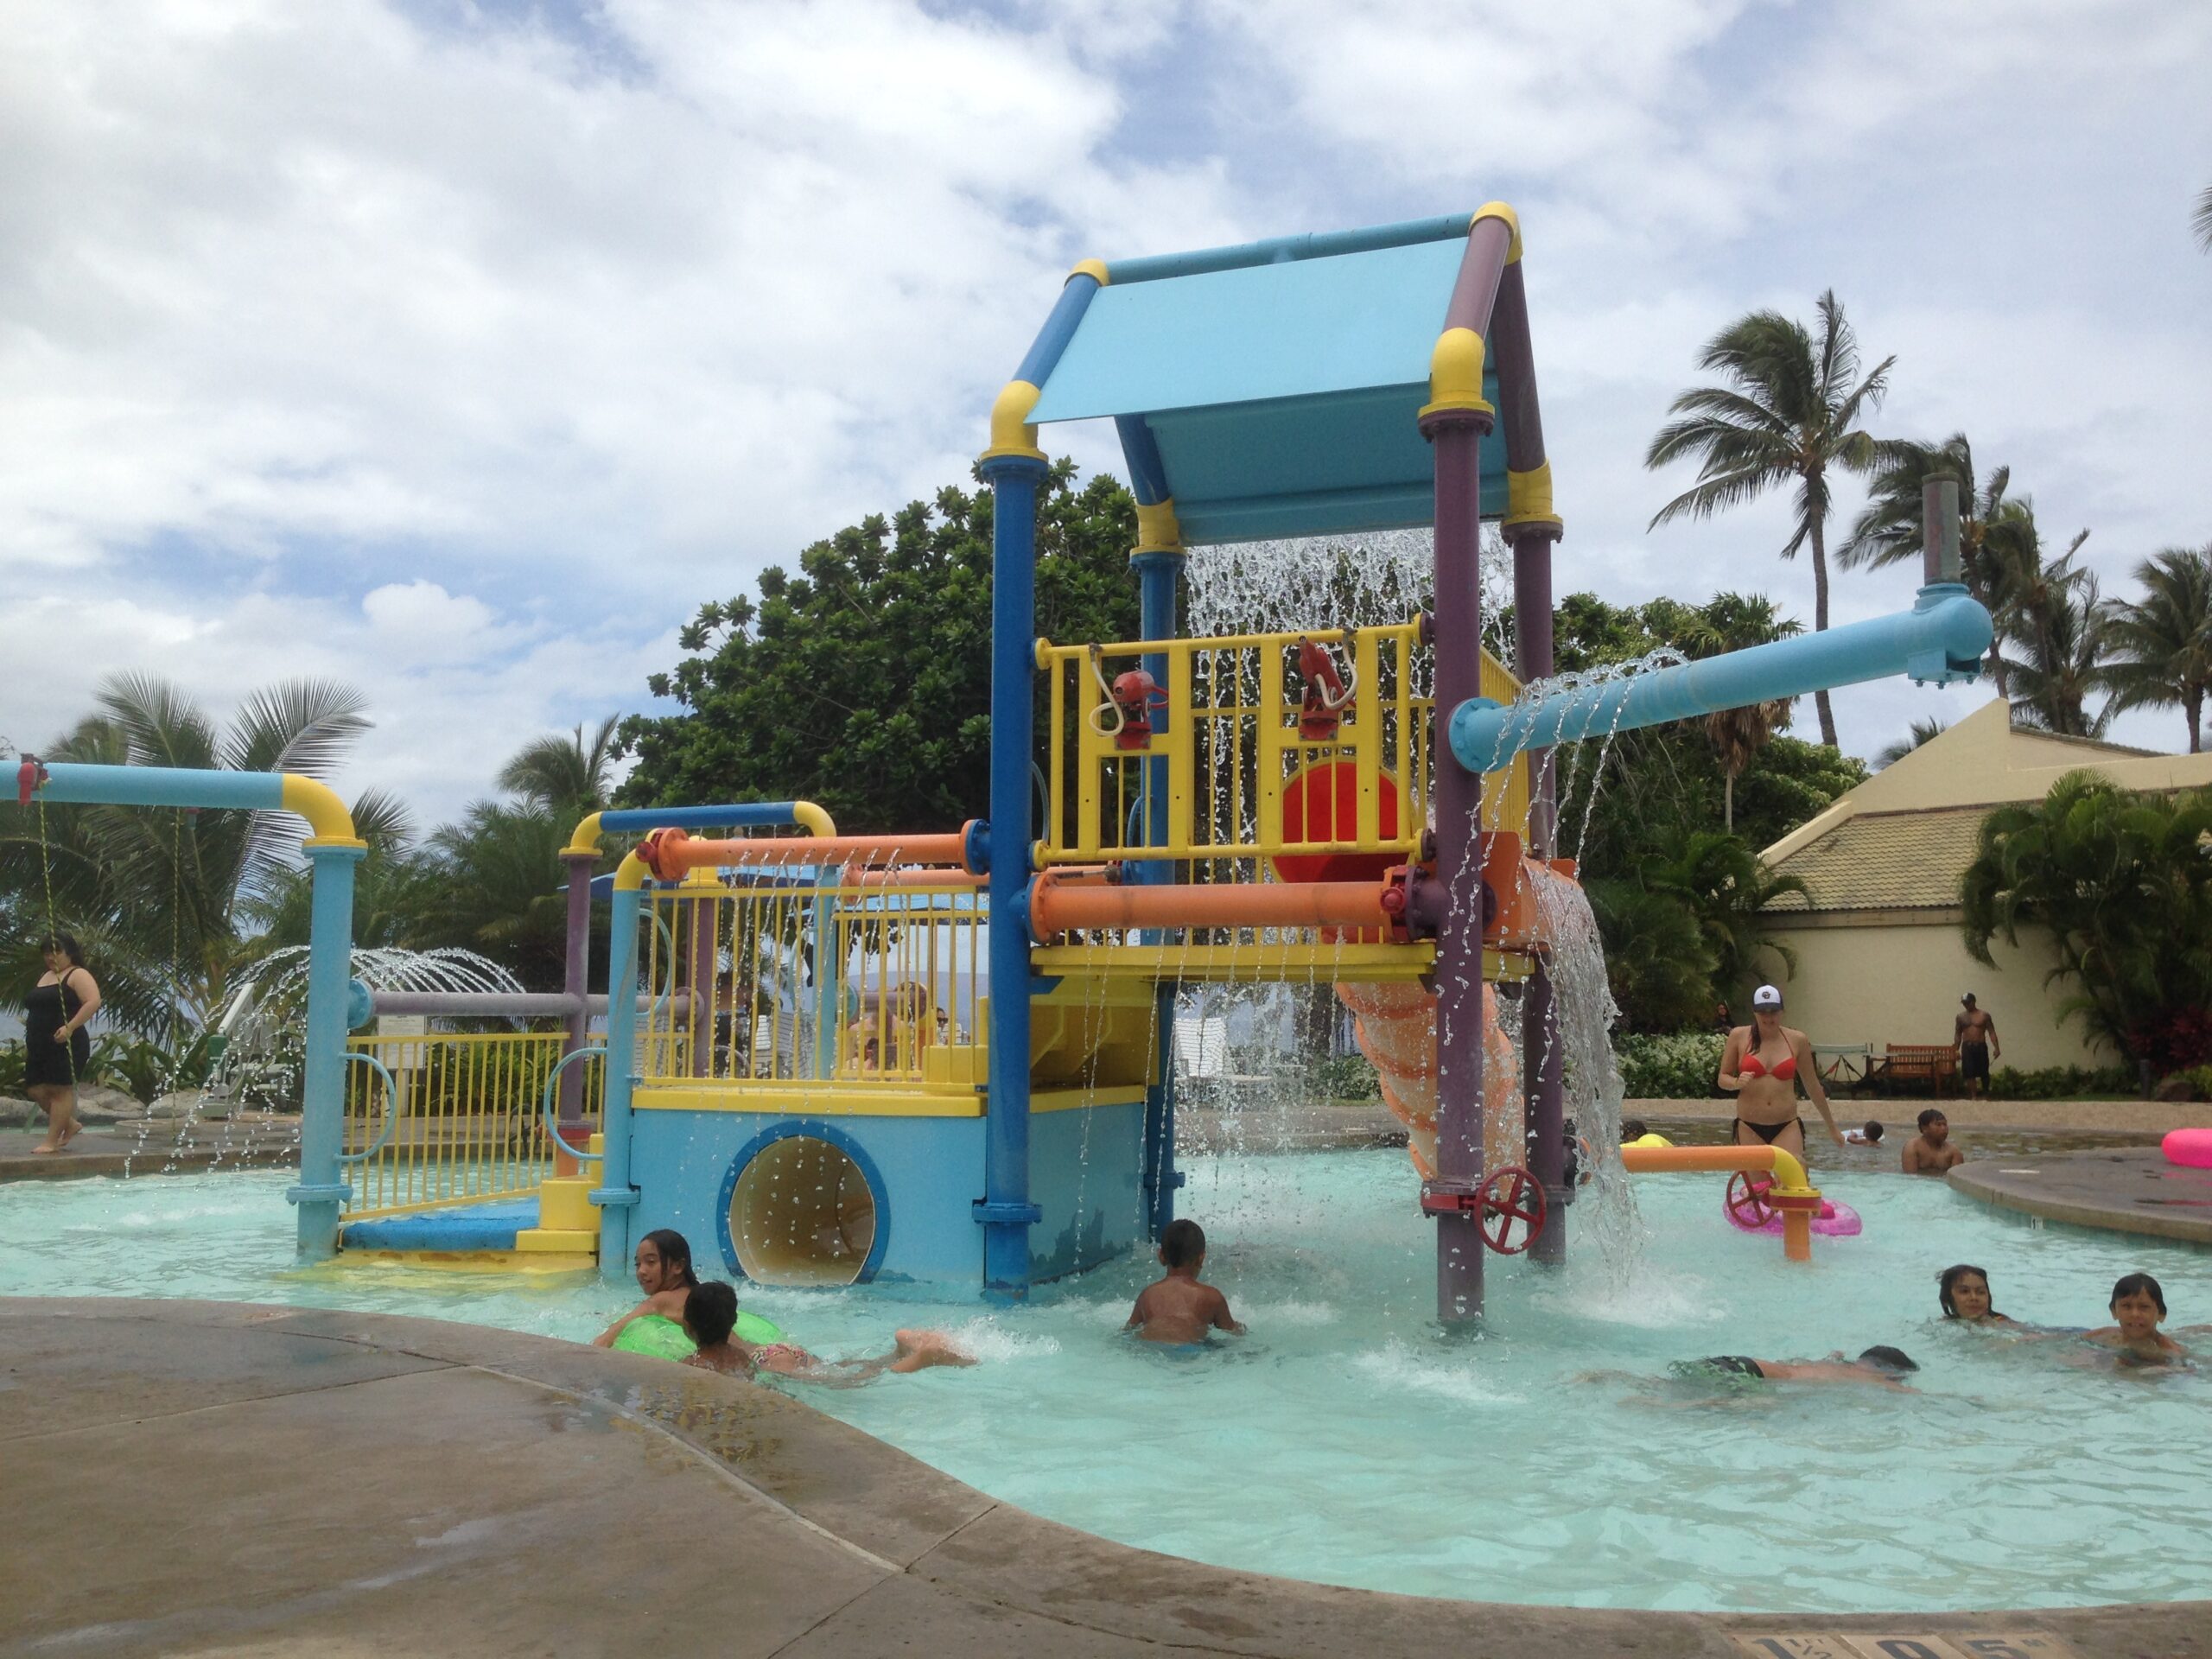 A child sees a water playground, a parent sees a lot of water hazards.